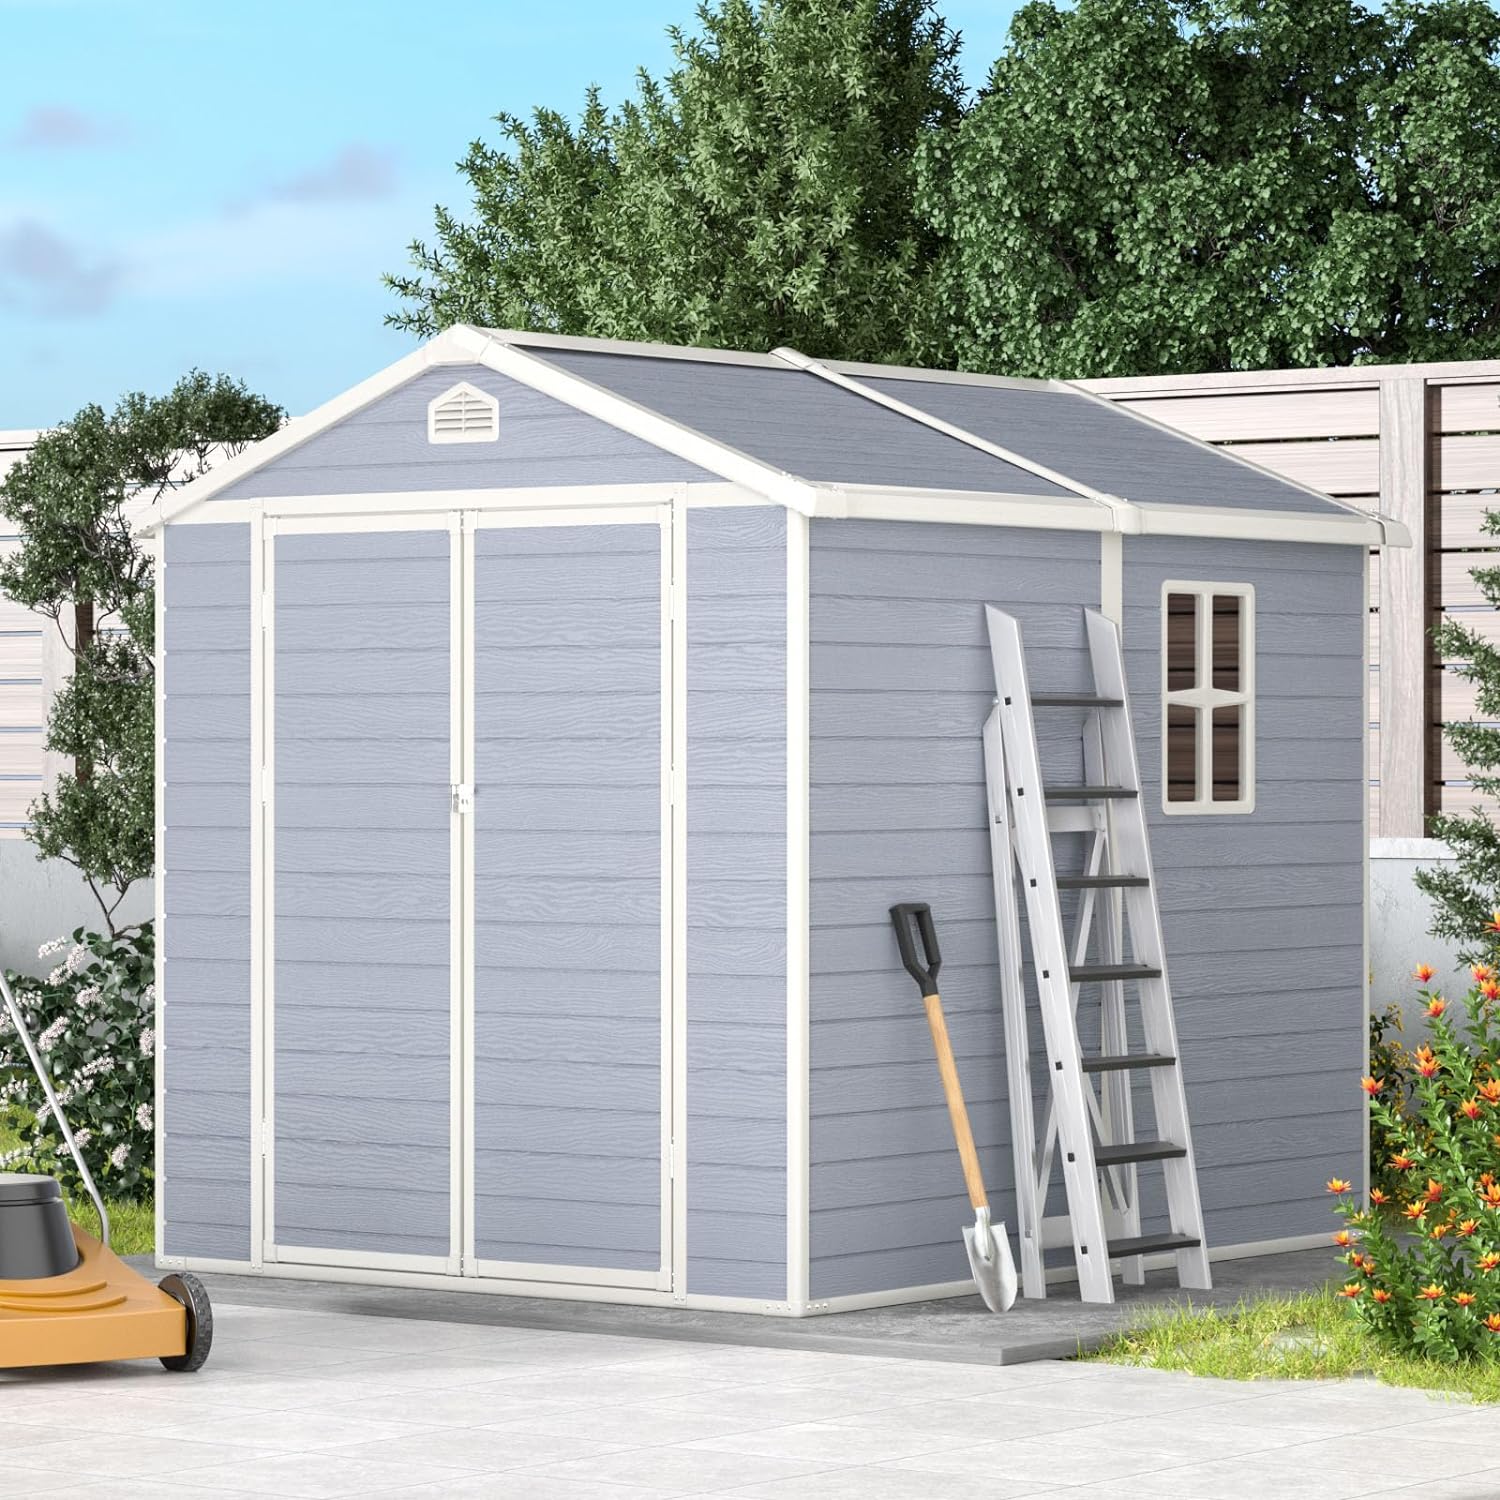 6’ x 8’ Resin Outdoor Storage Shed, Utility Tool Shed Storage House,  Gray